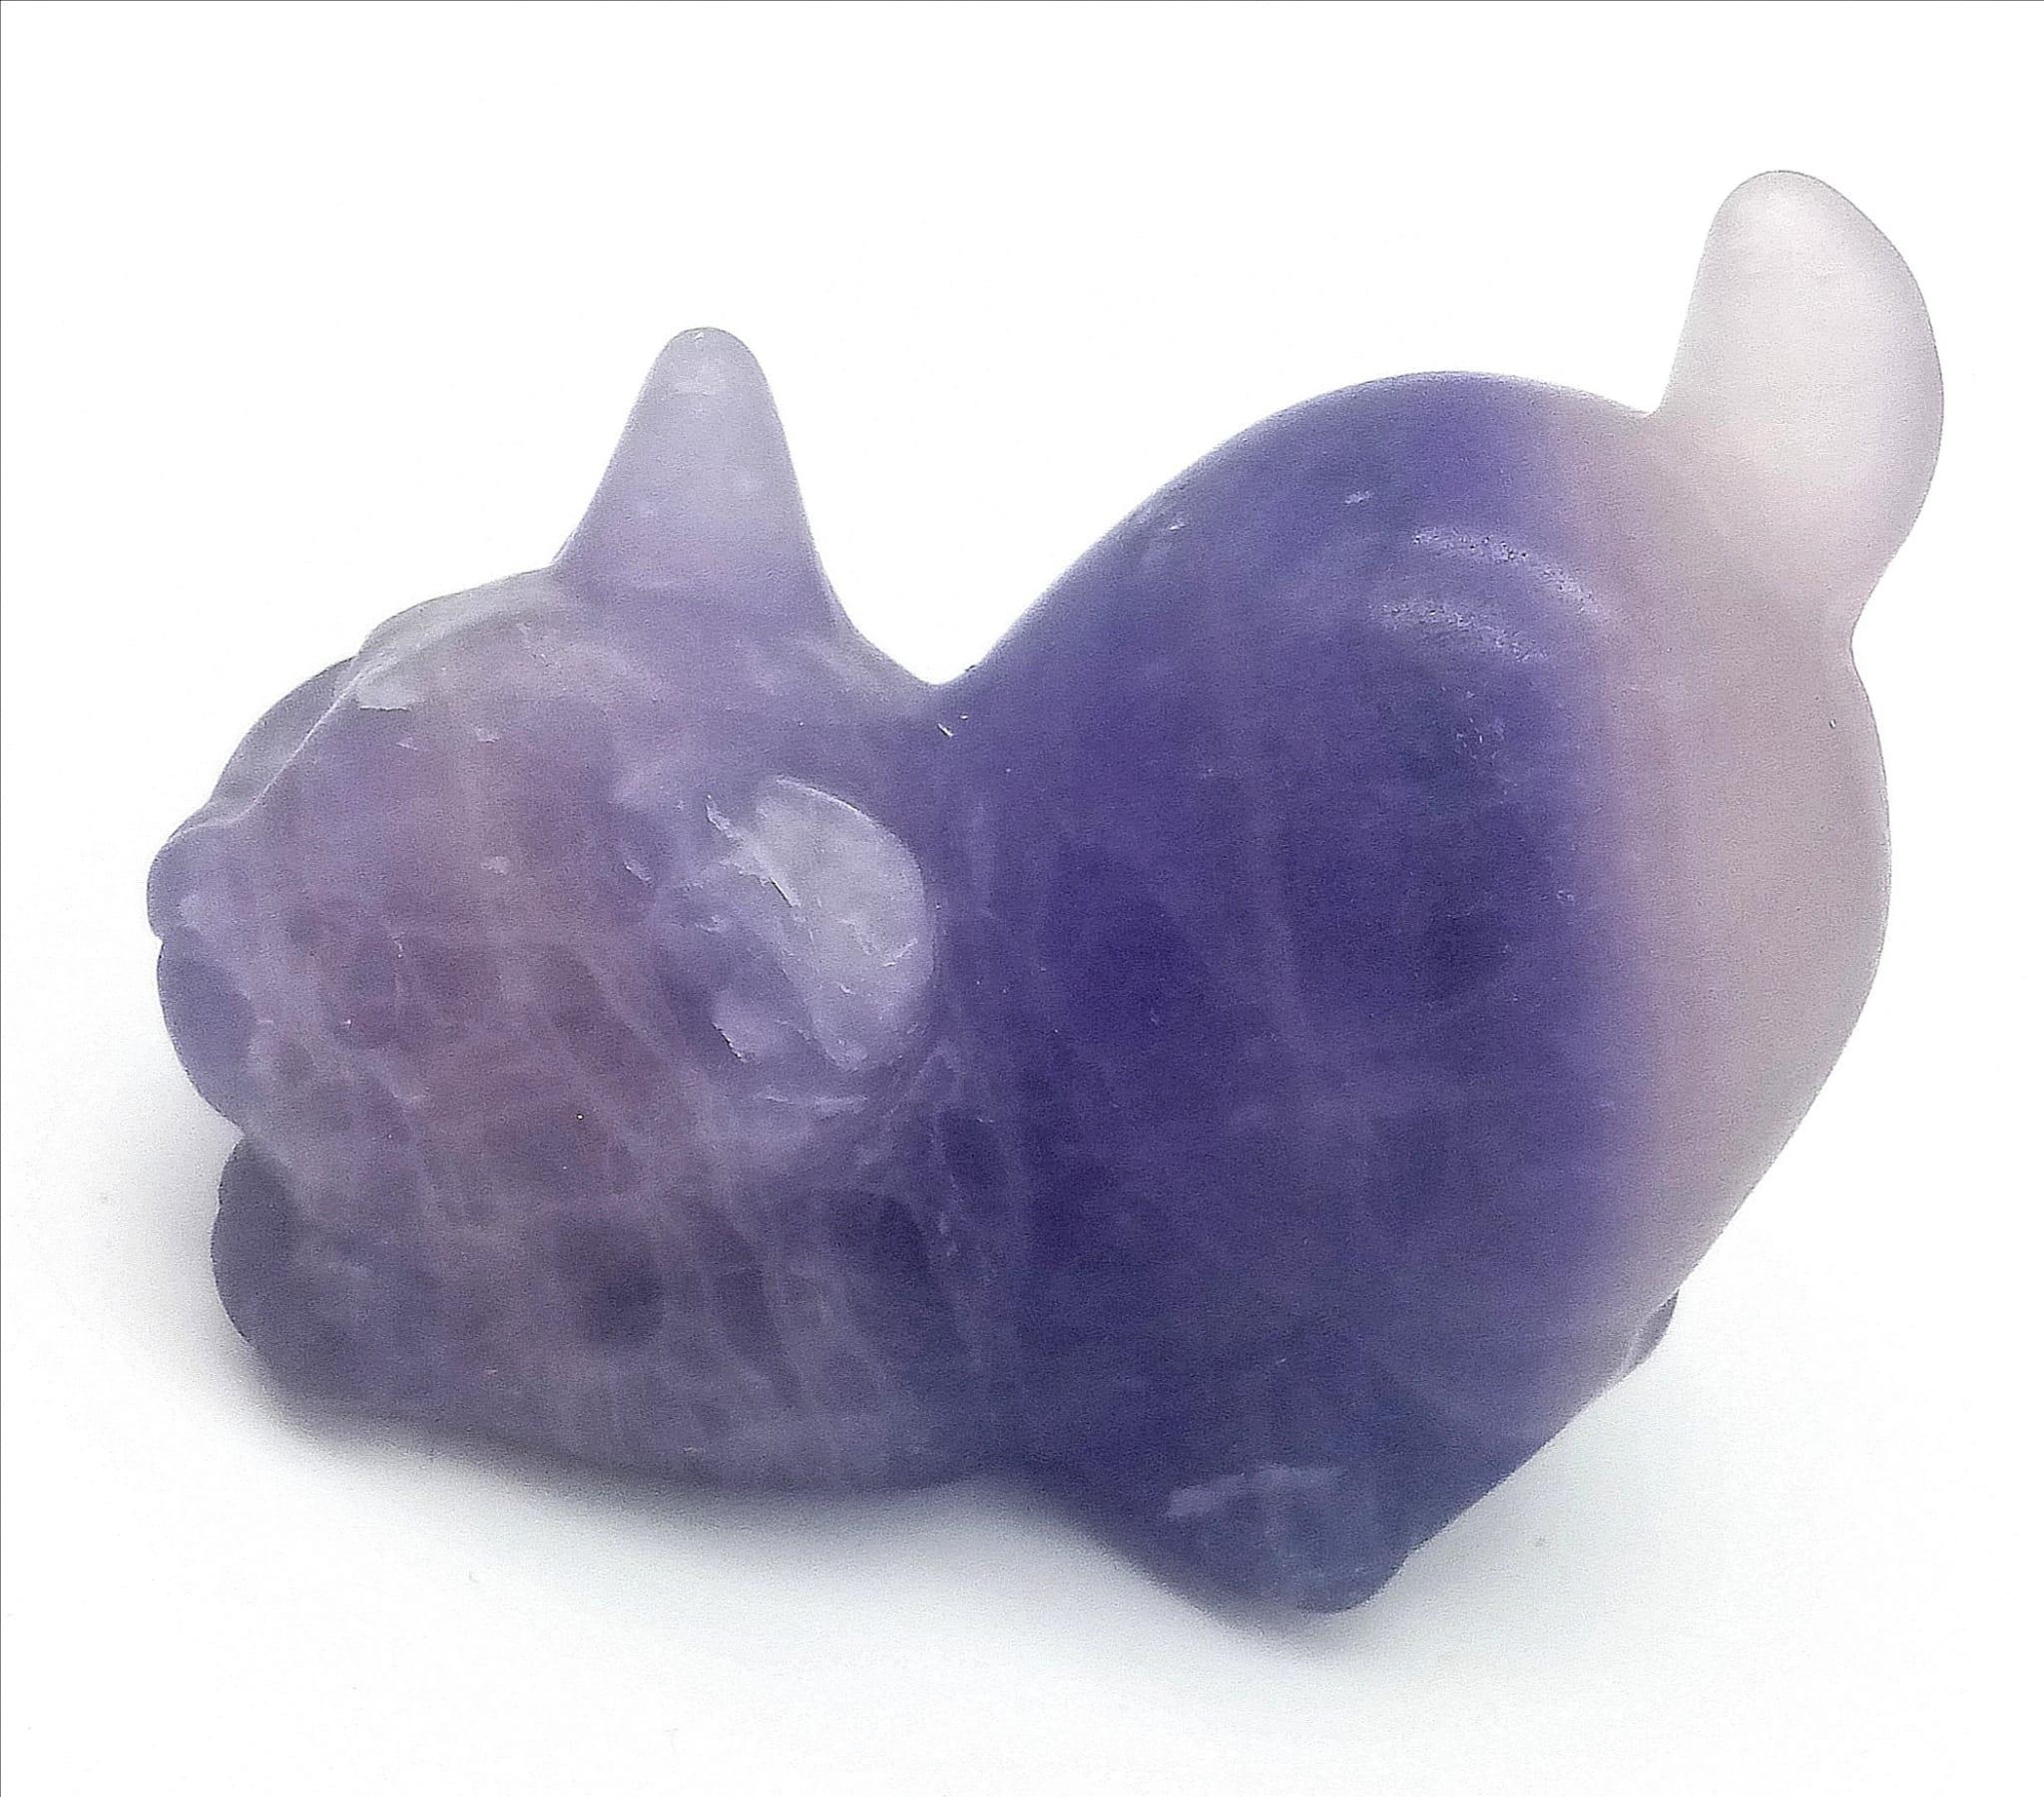 A Natural Fluorite Hand-Carved Crouching Pussy Figurine. 5cm x 5cm.